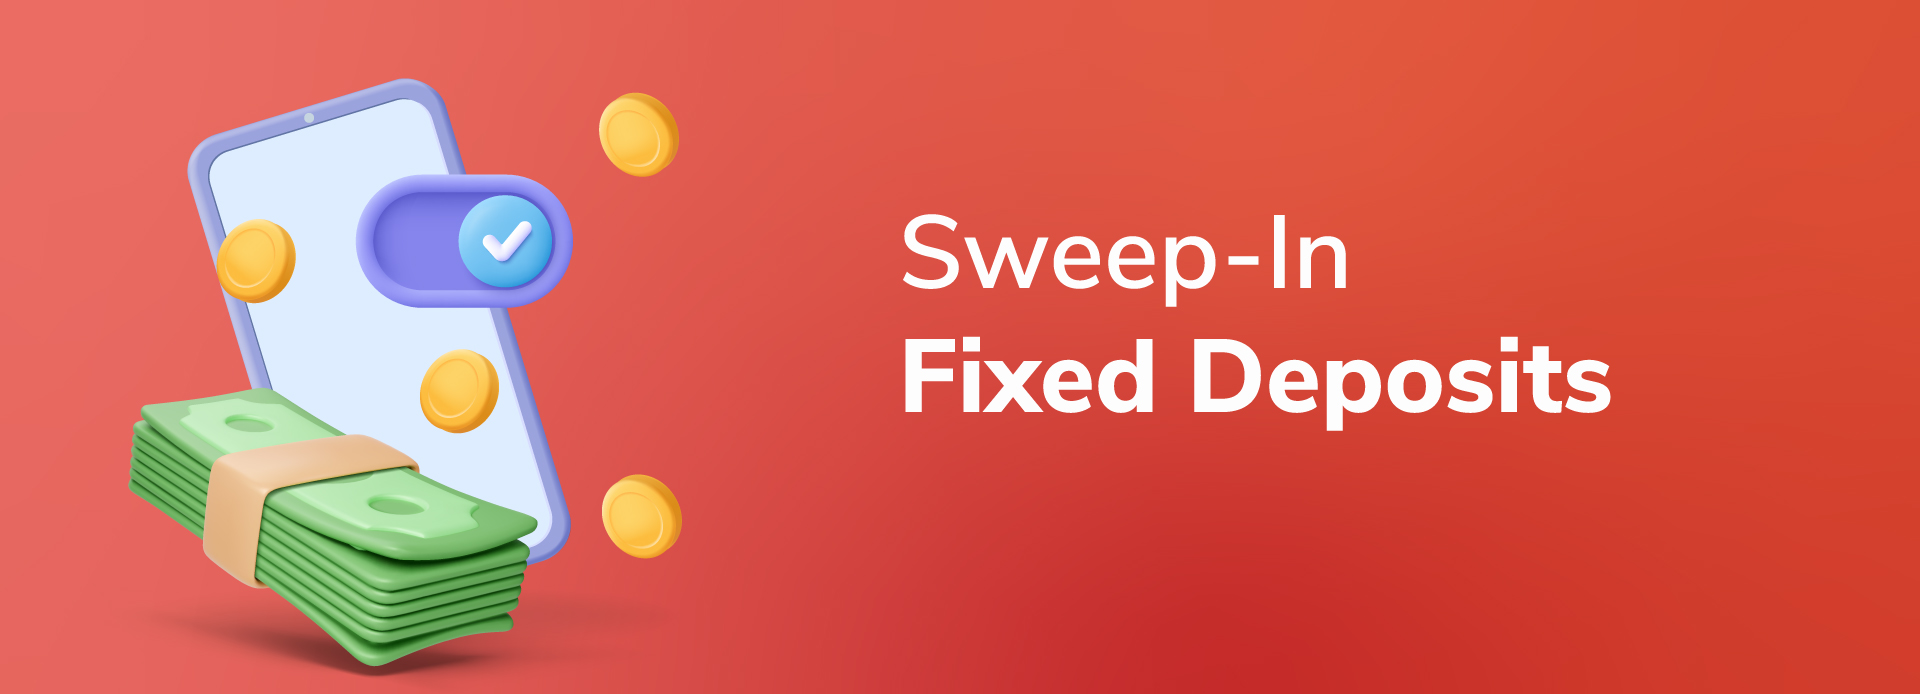 What is a sweep-in fixed deposit? What are its benefits?